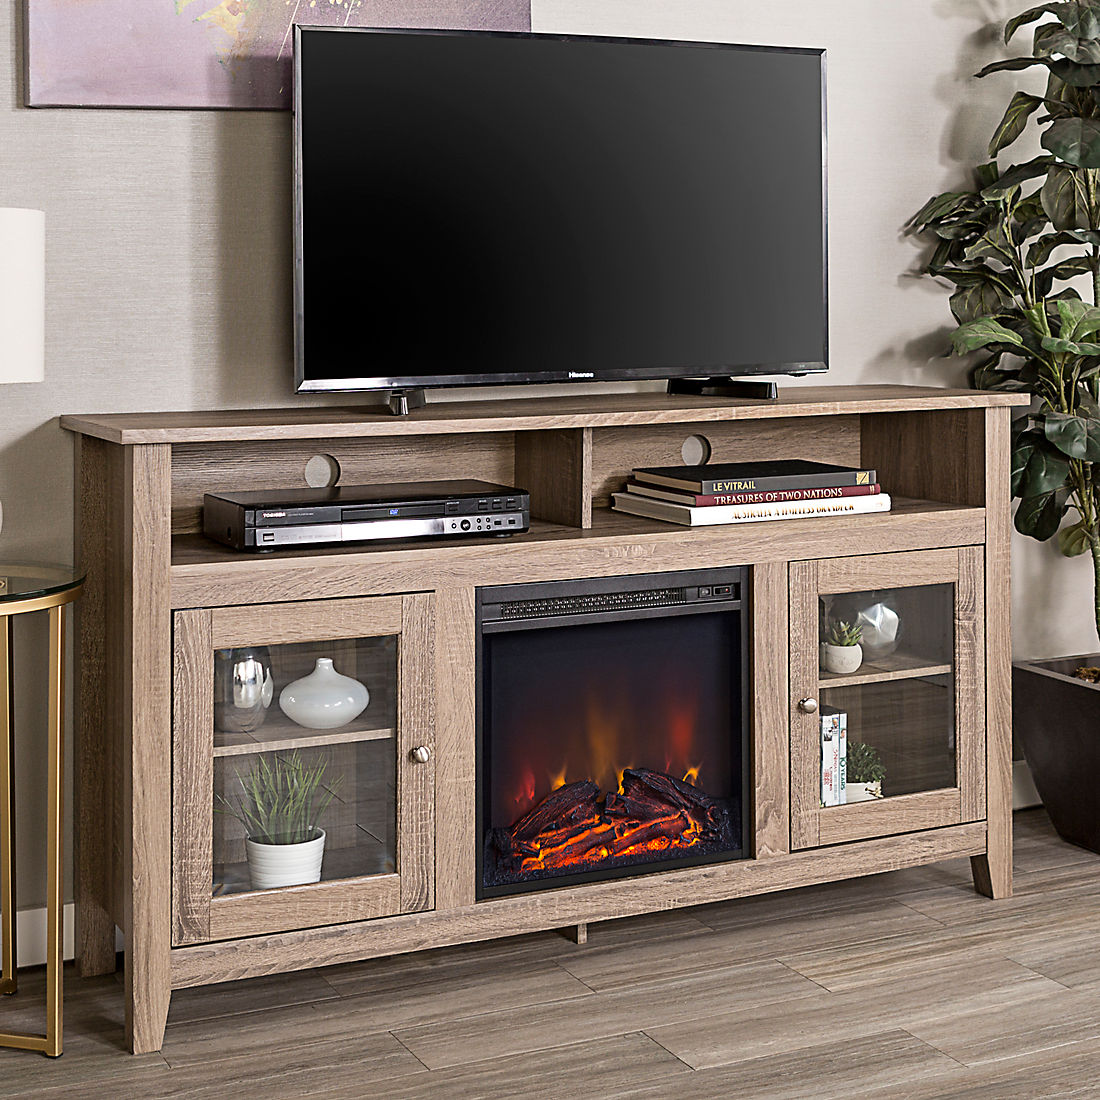 lowes tv stand fireplace combo